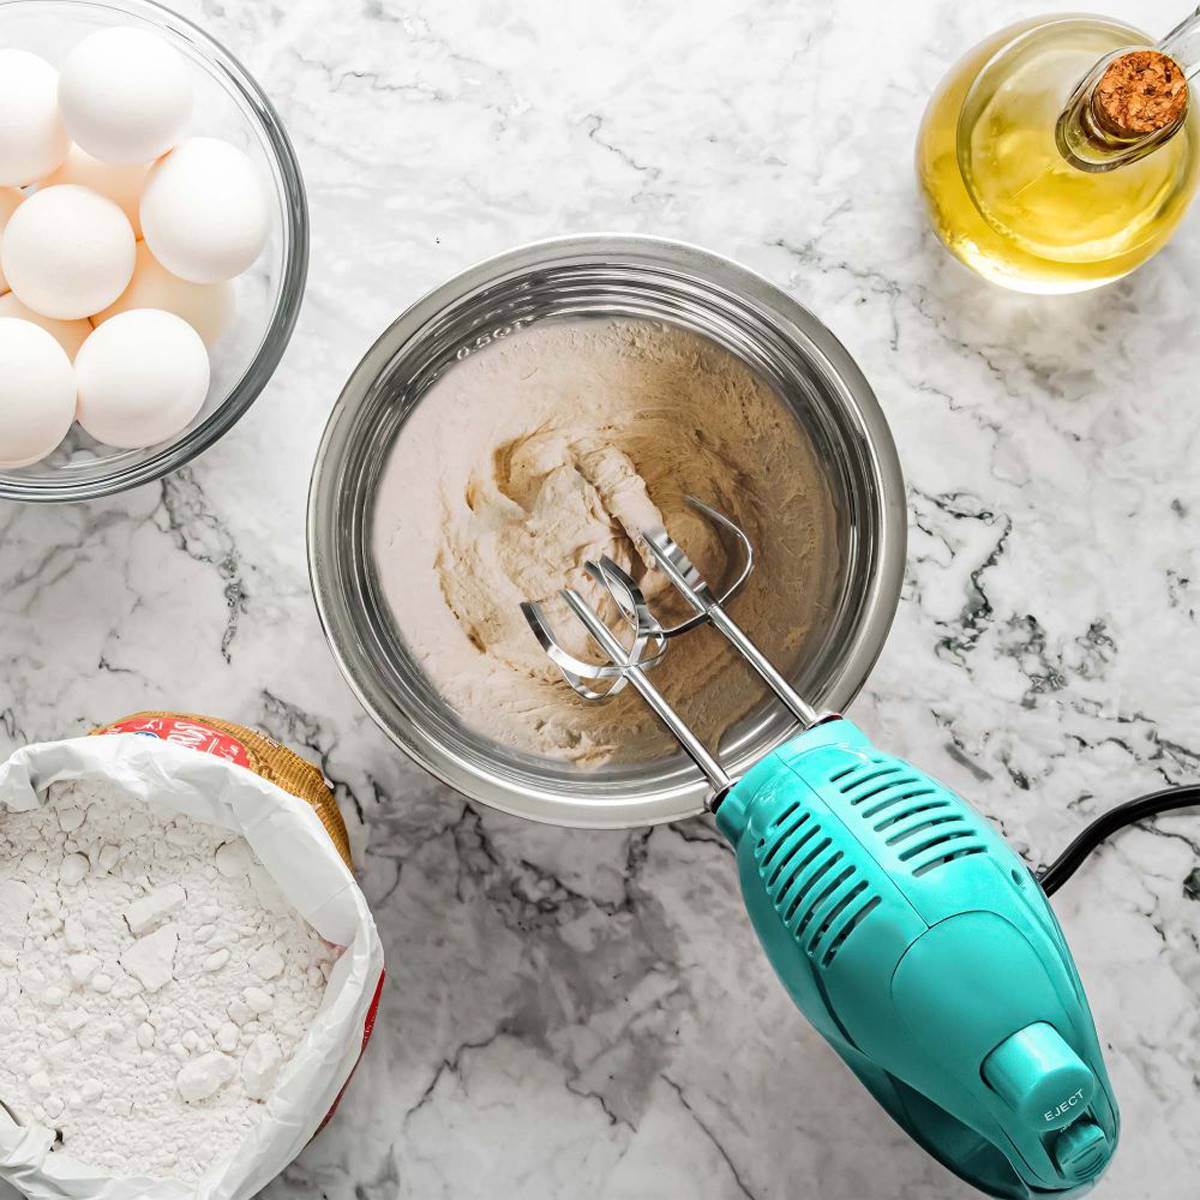 Ovente Portable 5-Speed Mixing Electric Hand Mixer - Turquoise